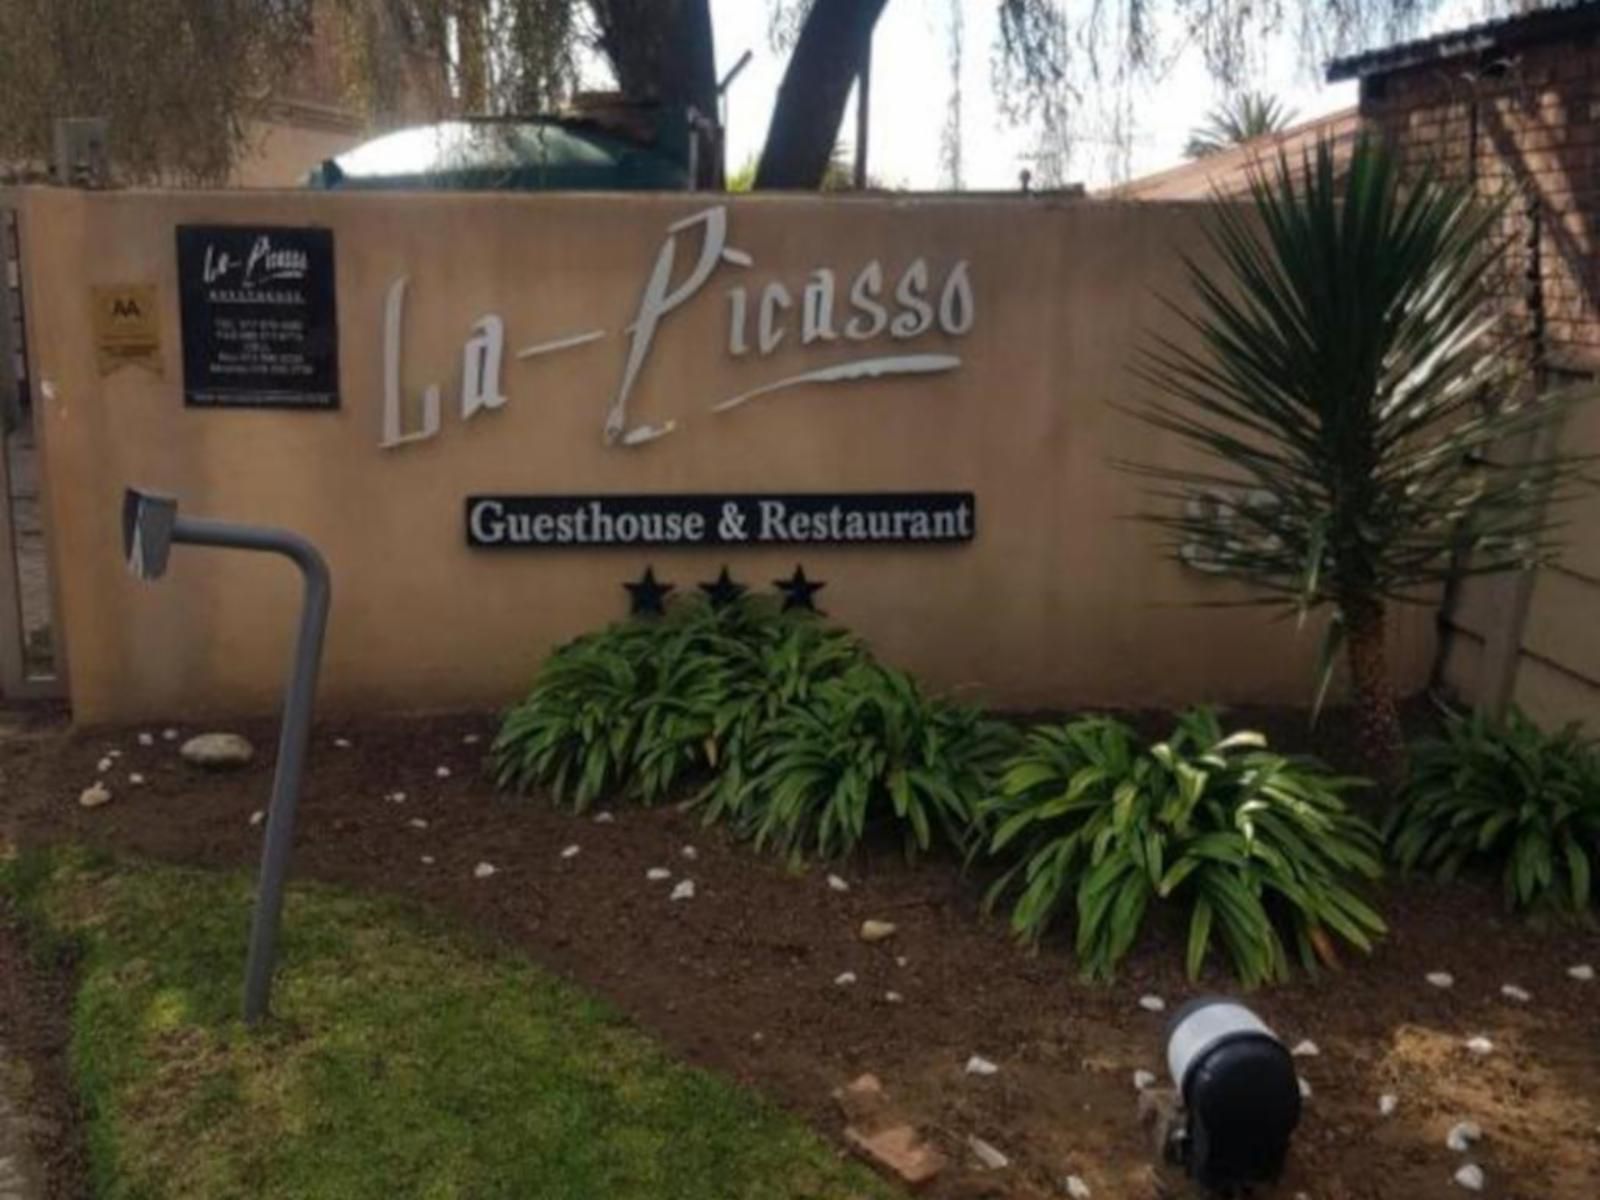 La Picasso Guesthouse Ermelo Mpumalanga South Africa Palm Tree, Plant, Nature, Wood, Sign